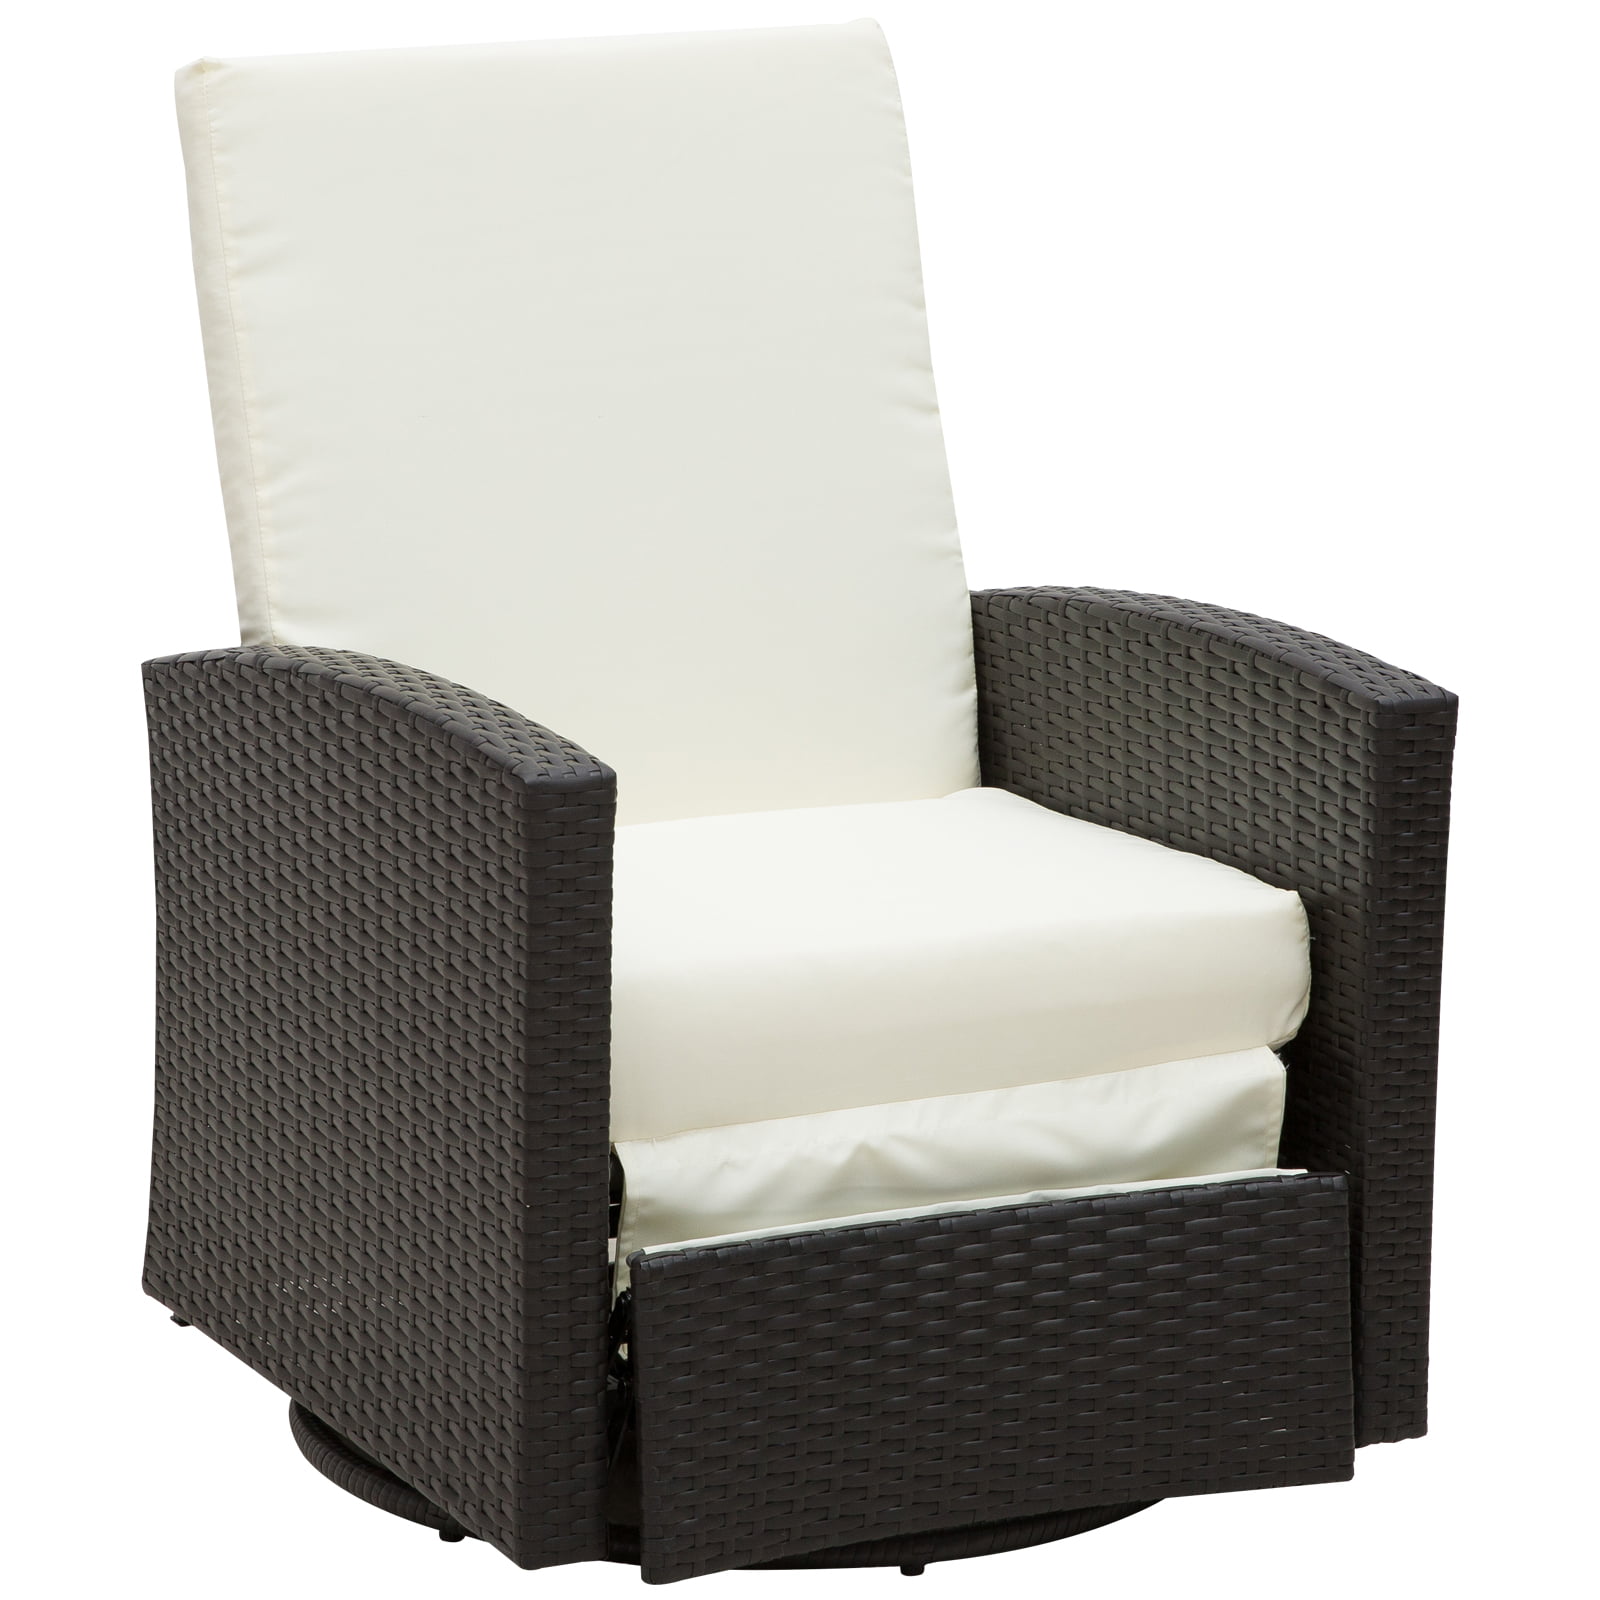 Outsunny Rattan Wicker Swivel Rocking Outdoor Recliner Lounge Chair 